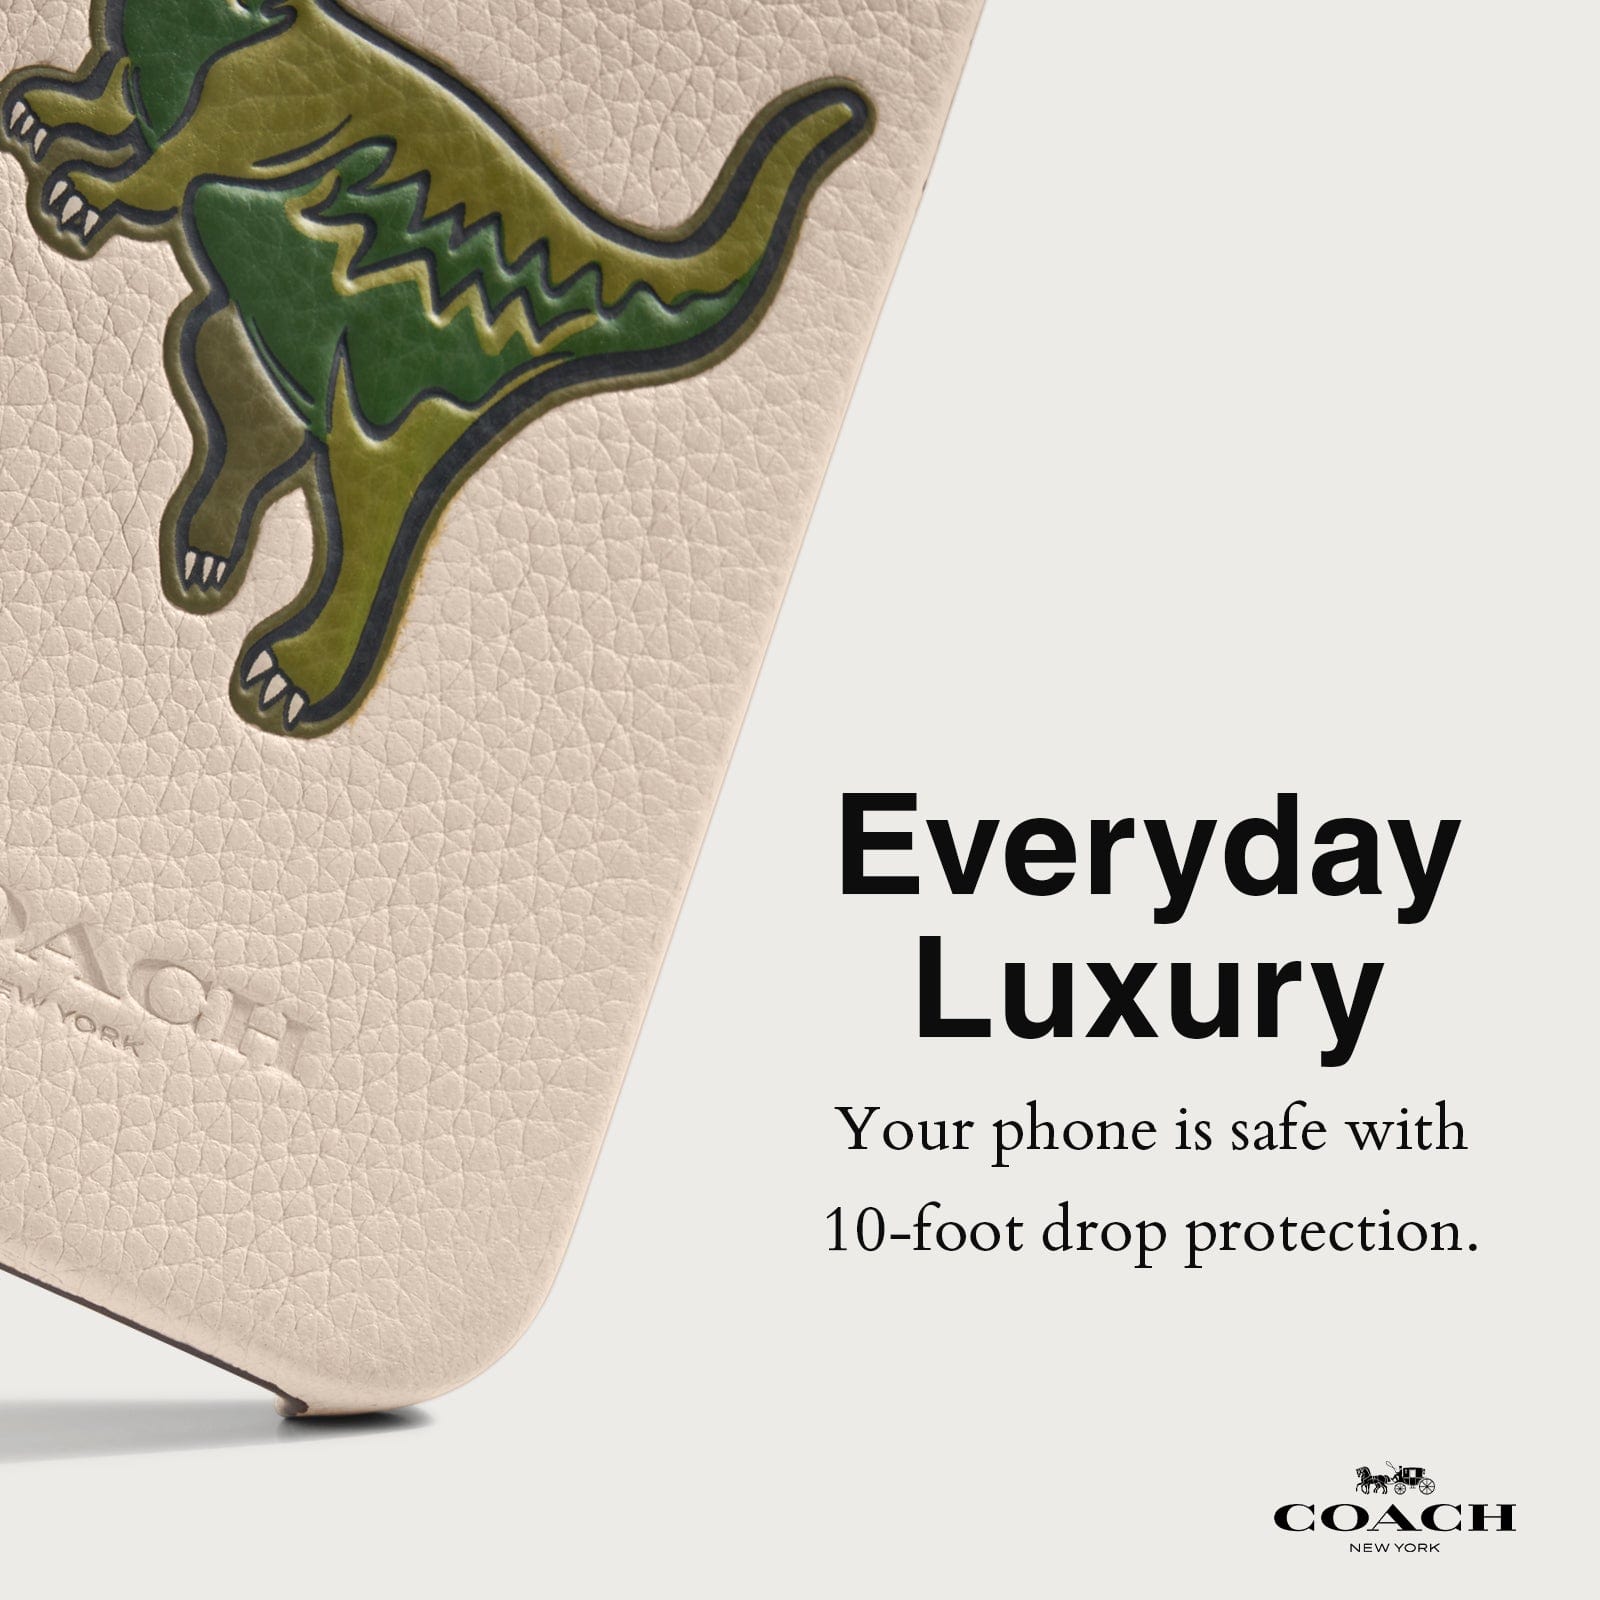 EVERYDAY LUXURY. YOUR PHONE IS SAFE WITH 10-FOOT DROP PROTECTION.